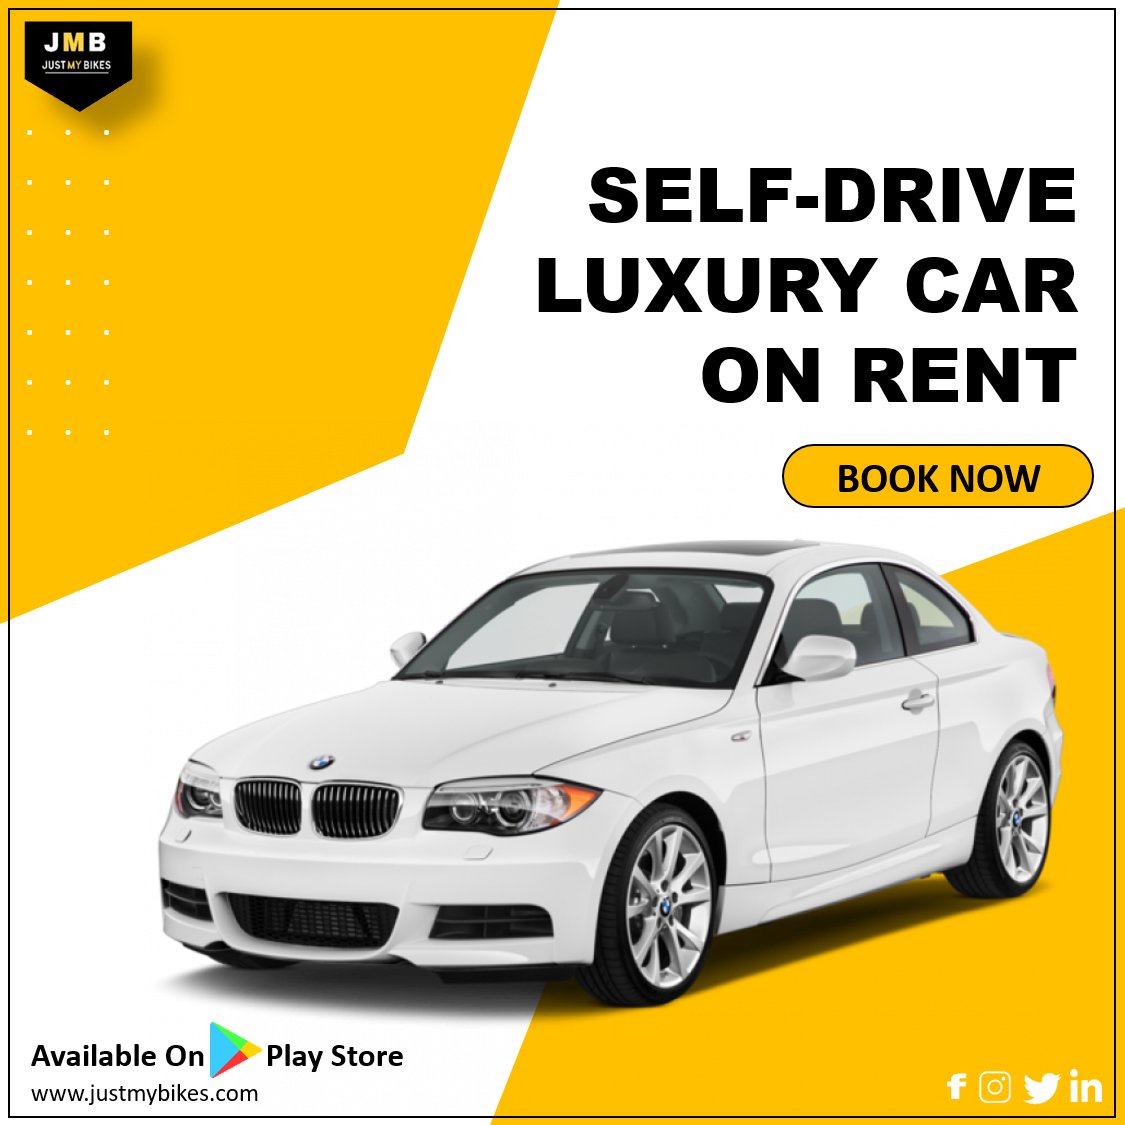 Online Self-Drive Car Booking Service in Lucknow| Best Car rental service in Lucknow| Best rent car service in Lucknow